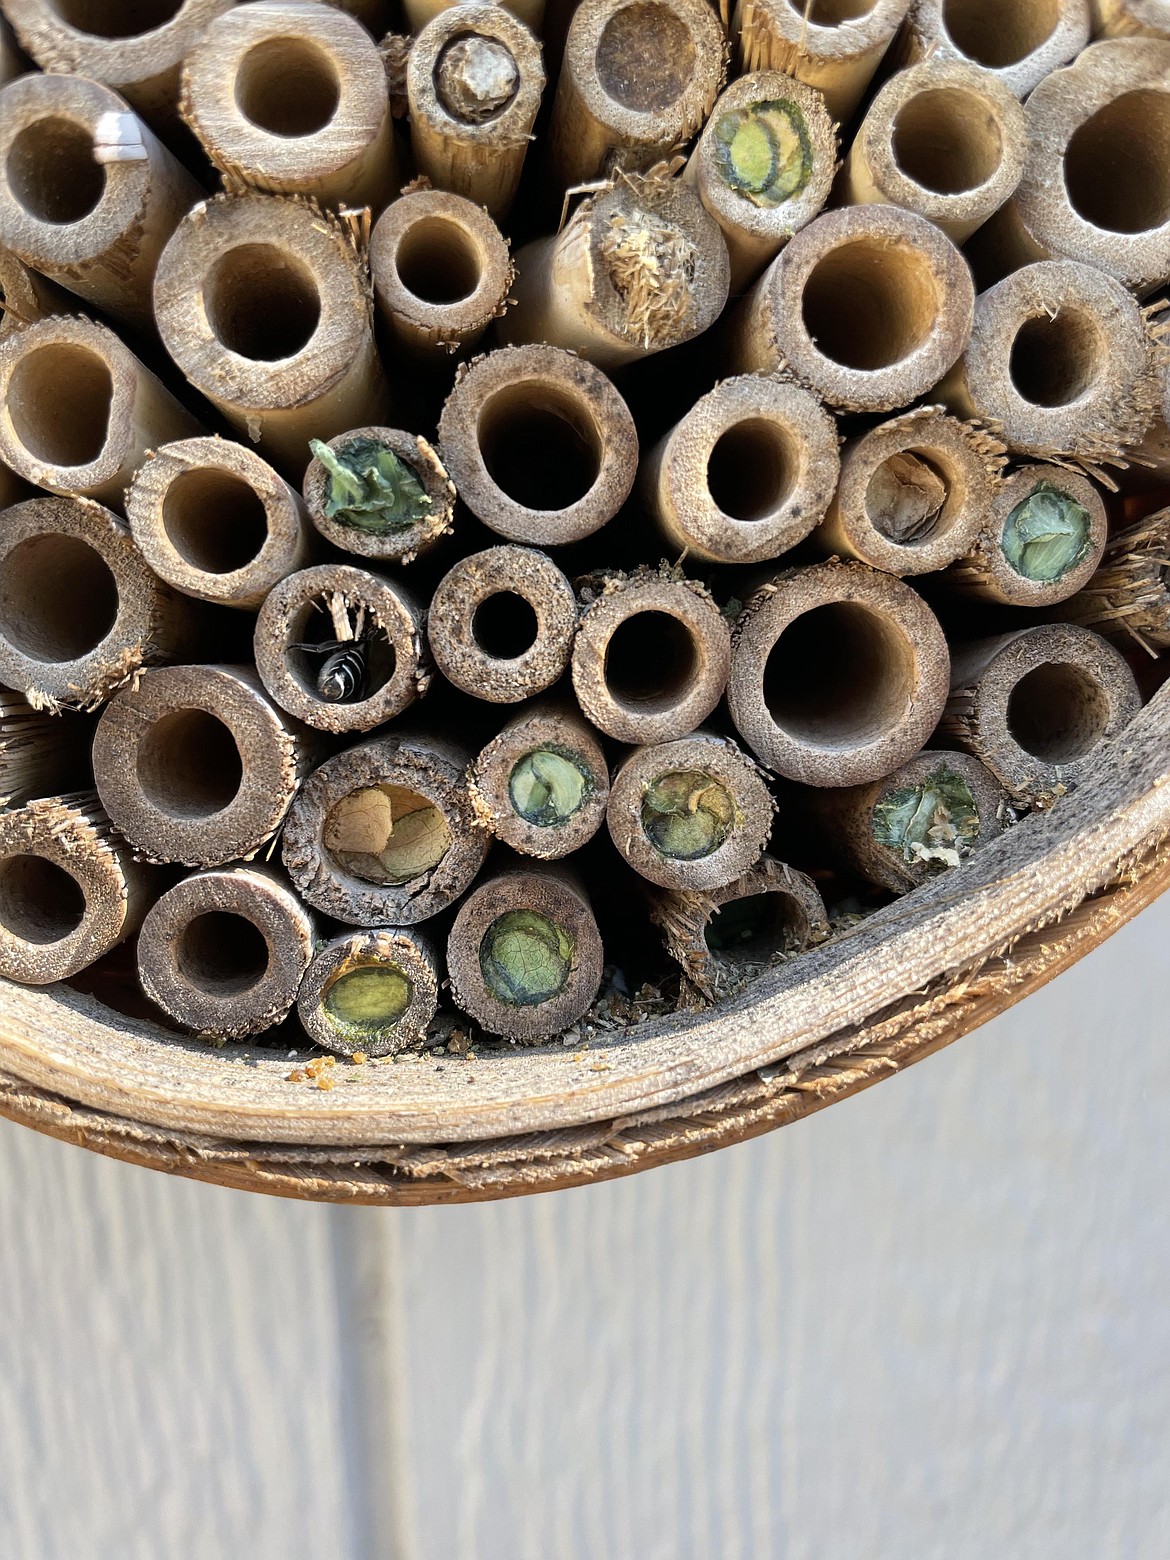 An alfalfa leafcutter bee packs a cell in a wooden beehouse.